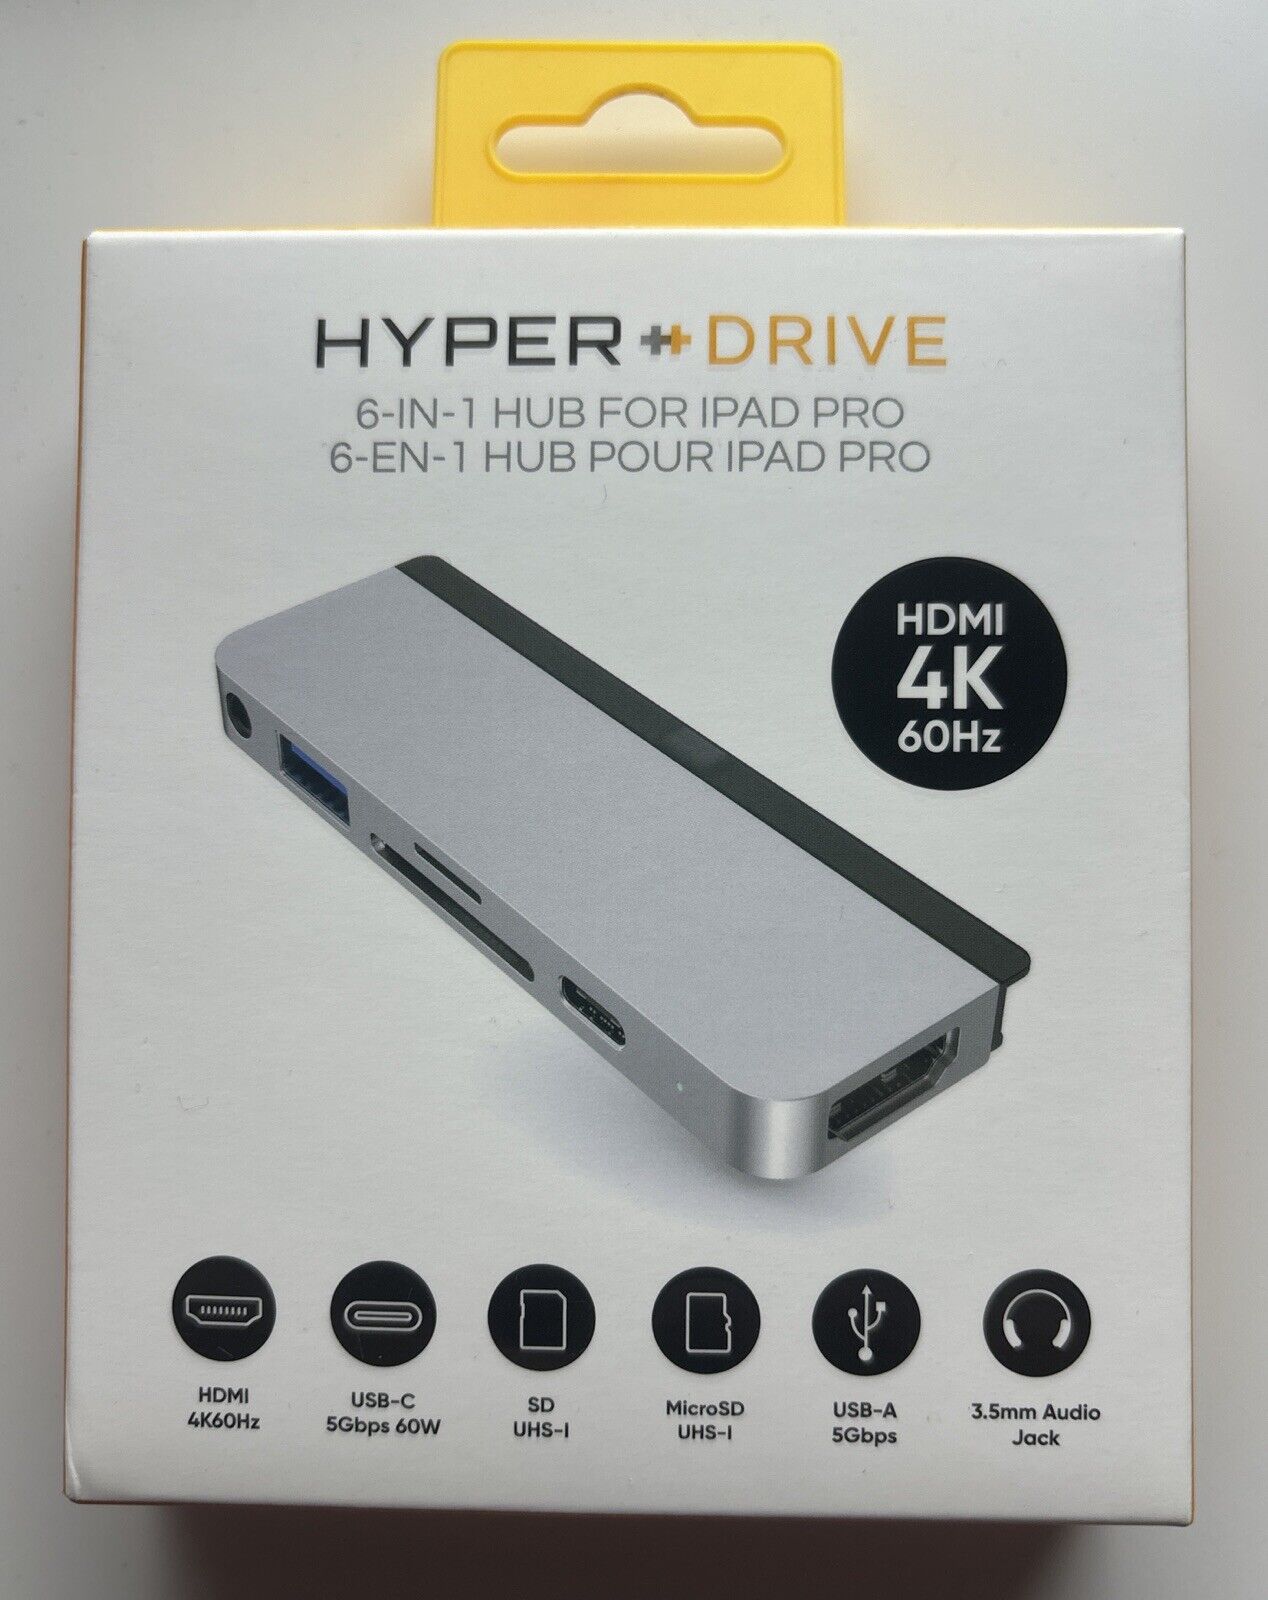 HyperDrive 6-In-1 USB-C Hub for iPad Pro - Space Gray